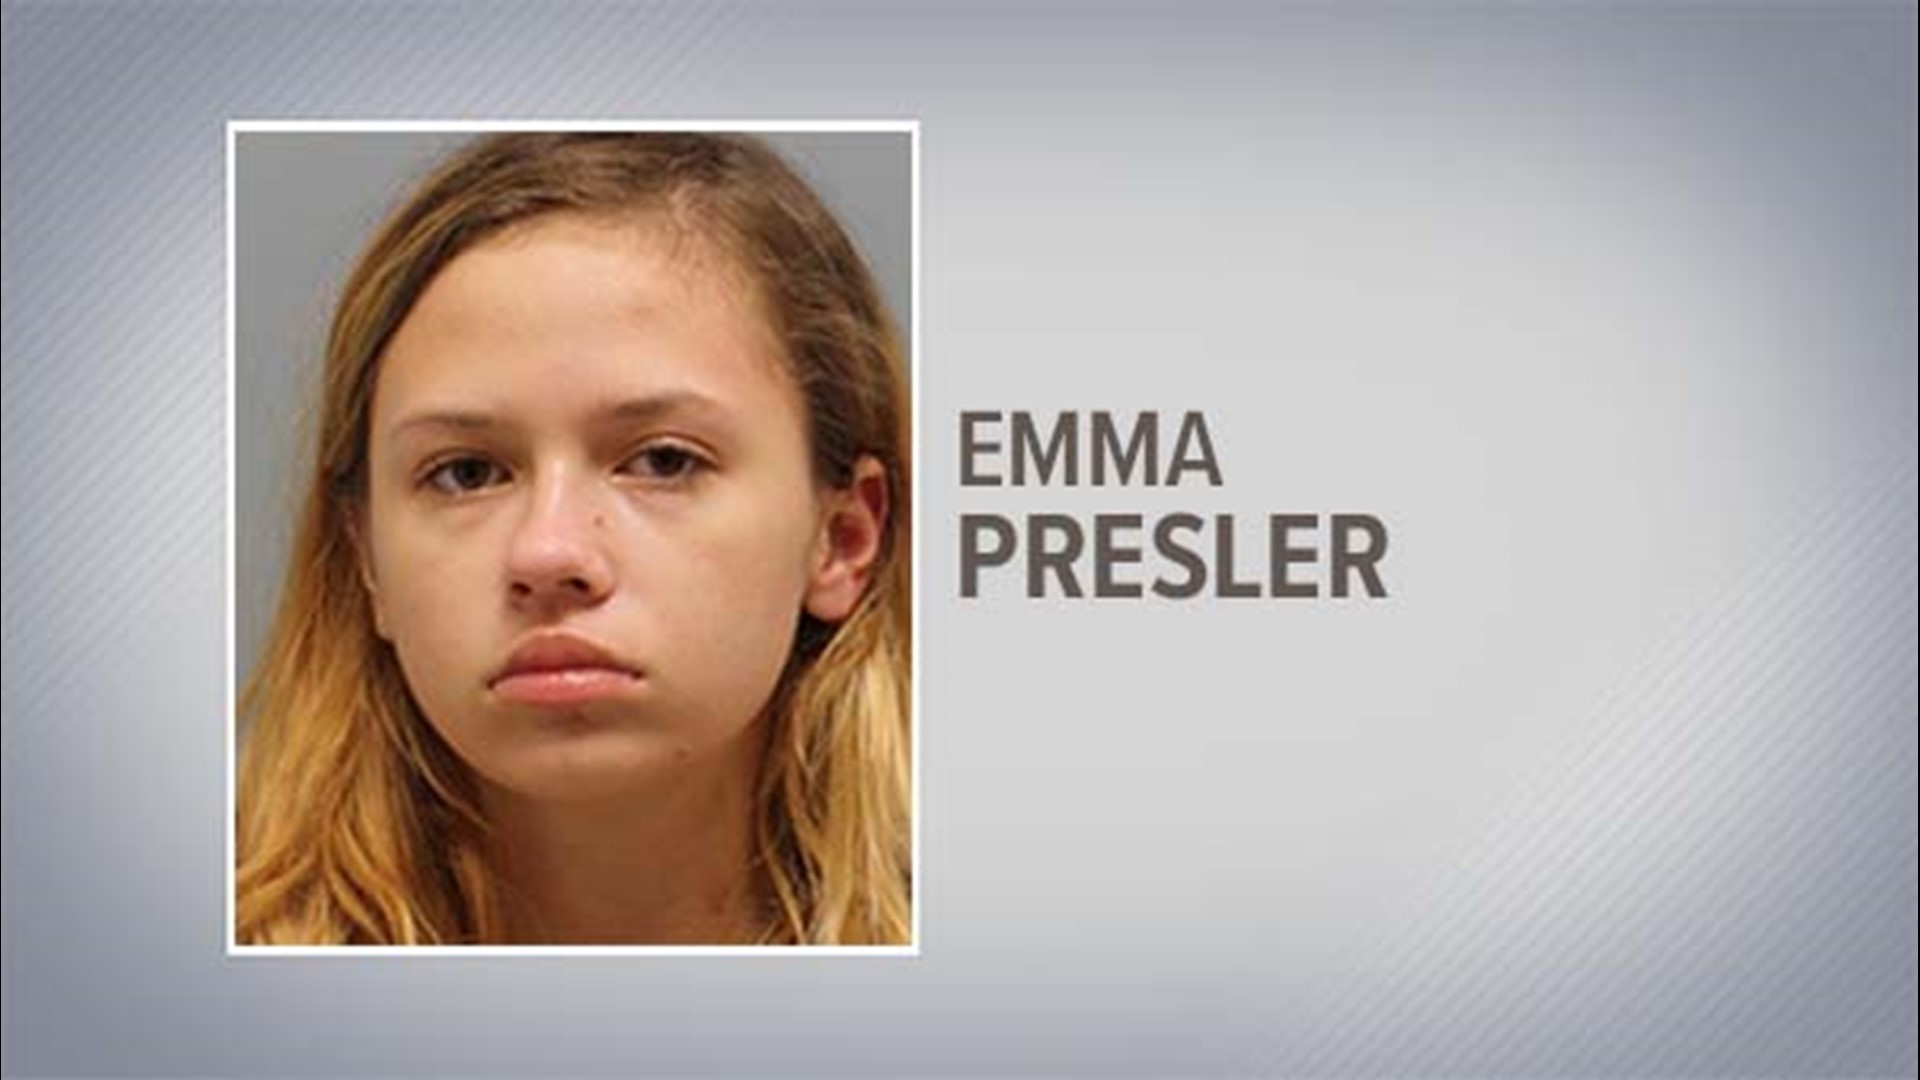 Houston firefighters found two people severely injured outside a burning home on August 6 in the Kingwood area. Police believe Emma Presler is to blame.